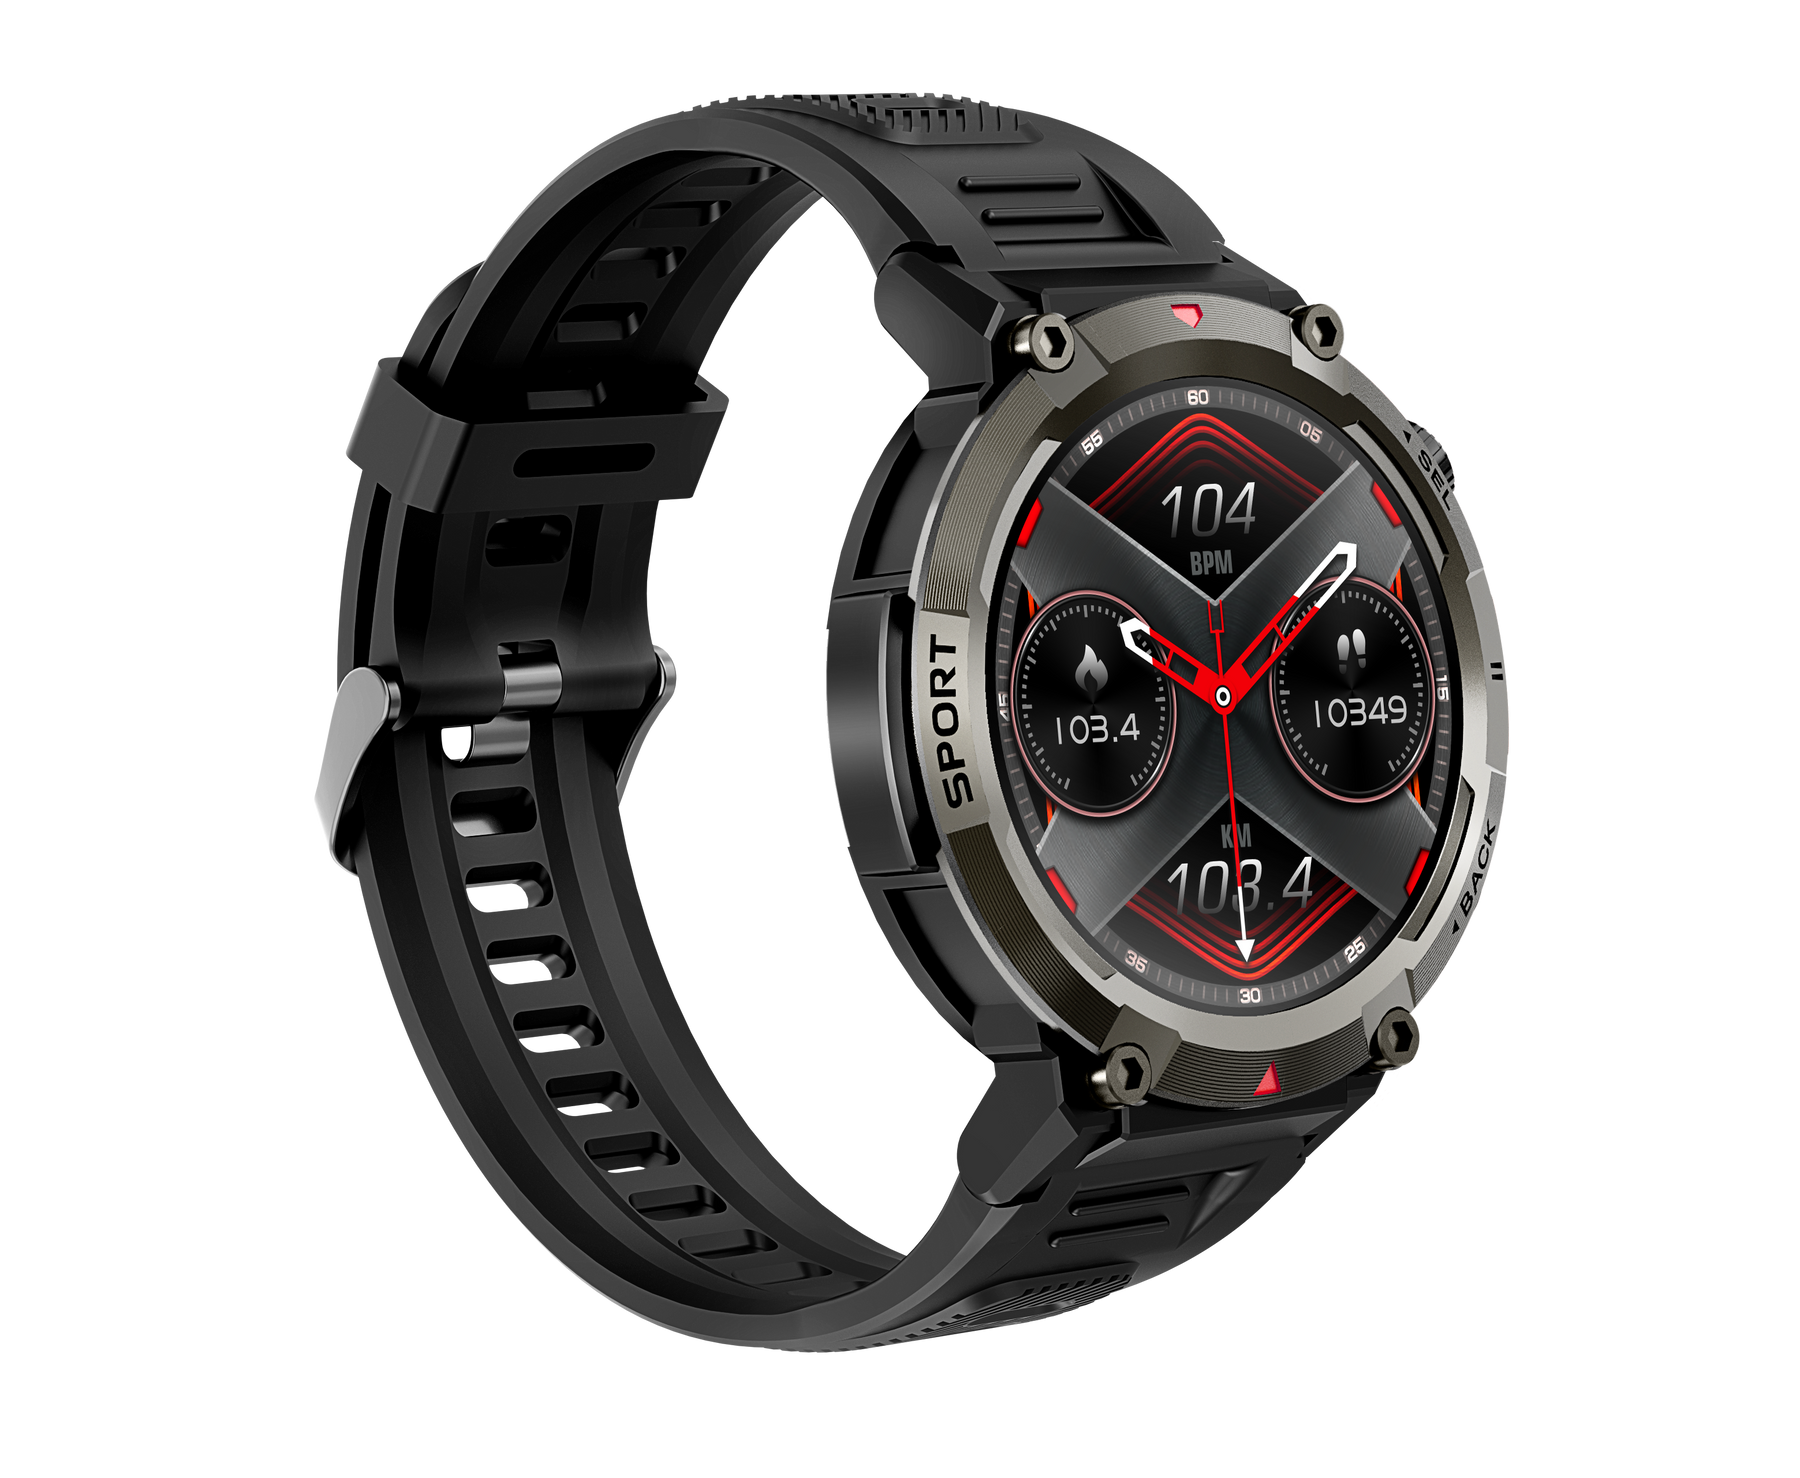 Bearscome S100 Blood pressure,Blood oxygen,LED light,HD Touch,Wireless Calls & Messages,Water-Resistant watch